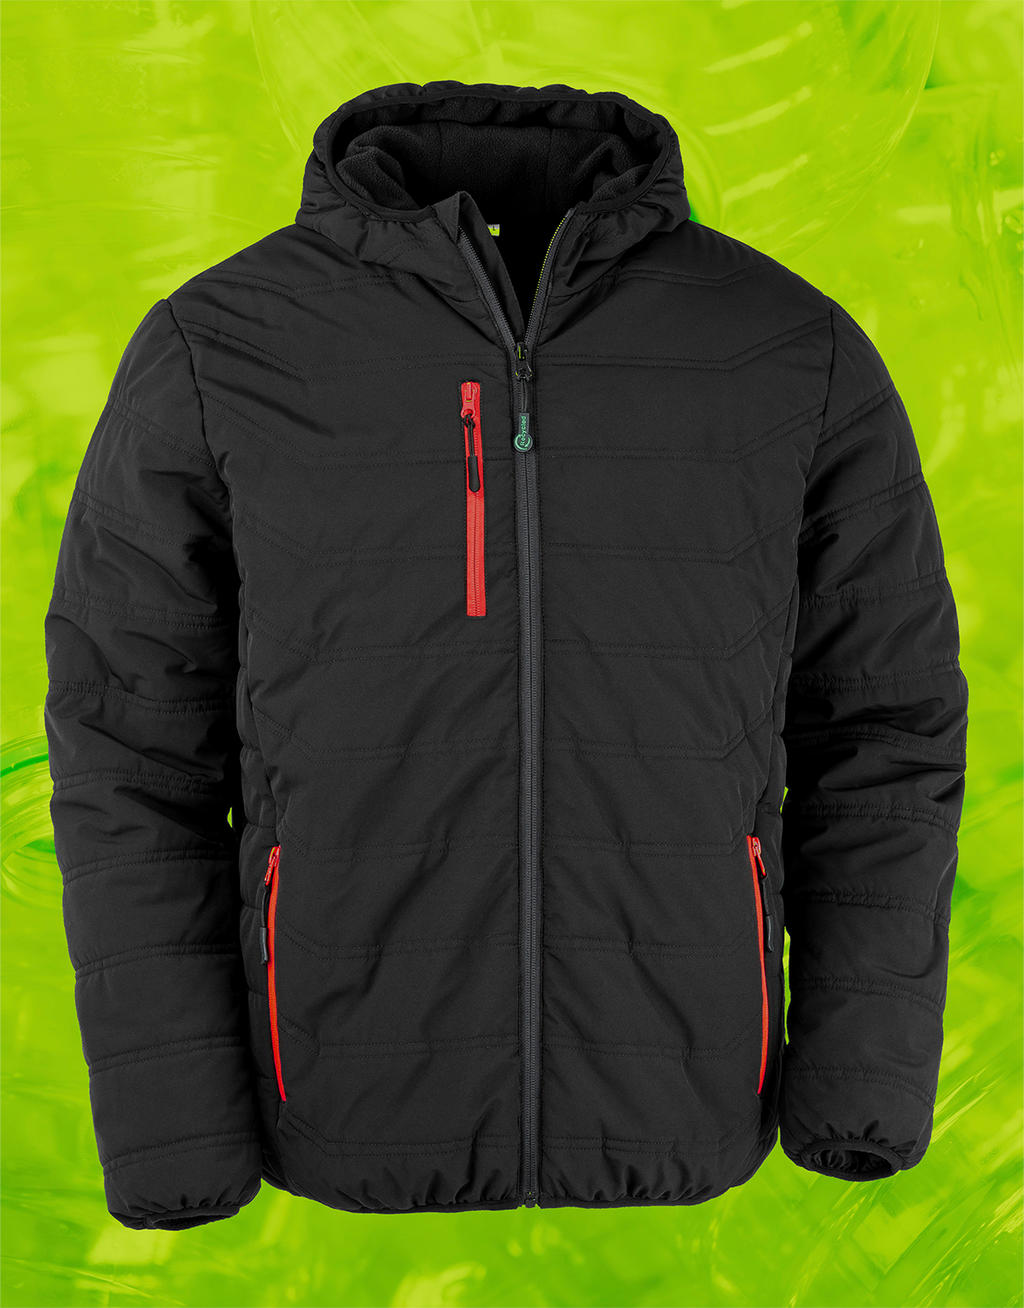  Black Compass Padded Winter Jacket in Farbe Black/Red